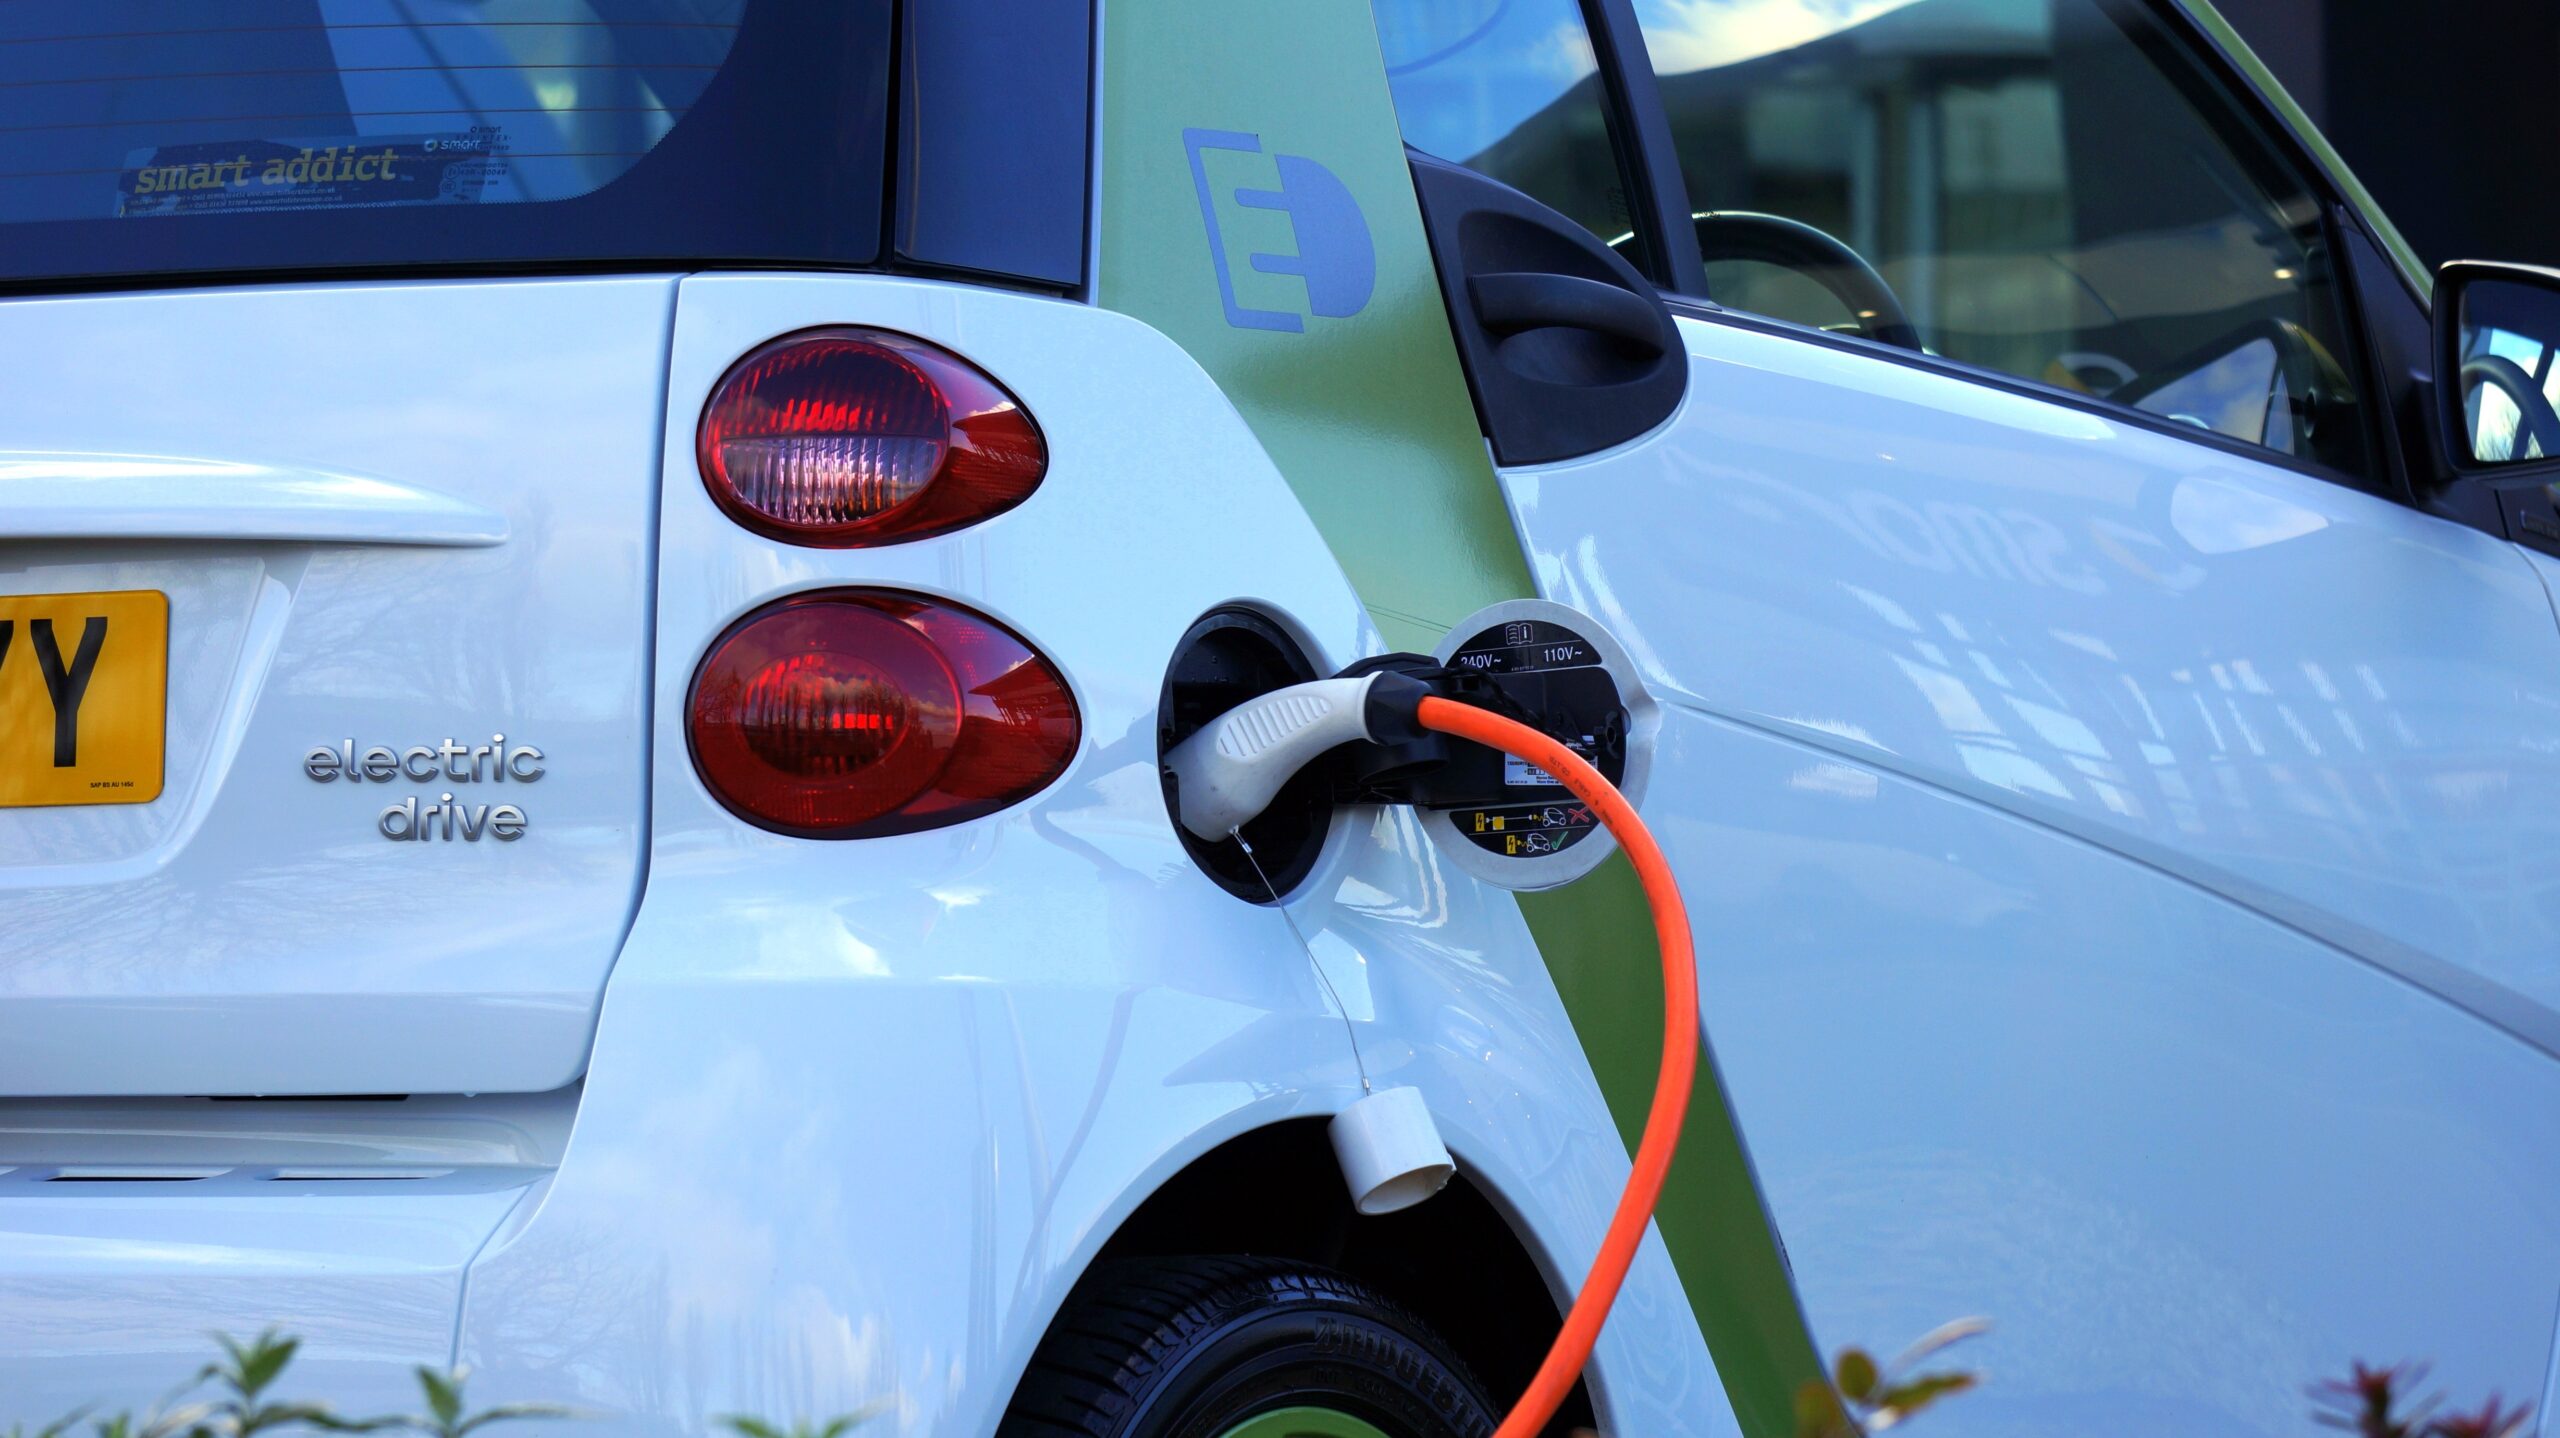 Image of an Electric car being charged.